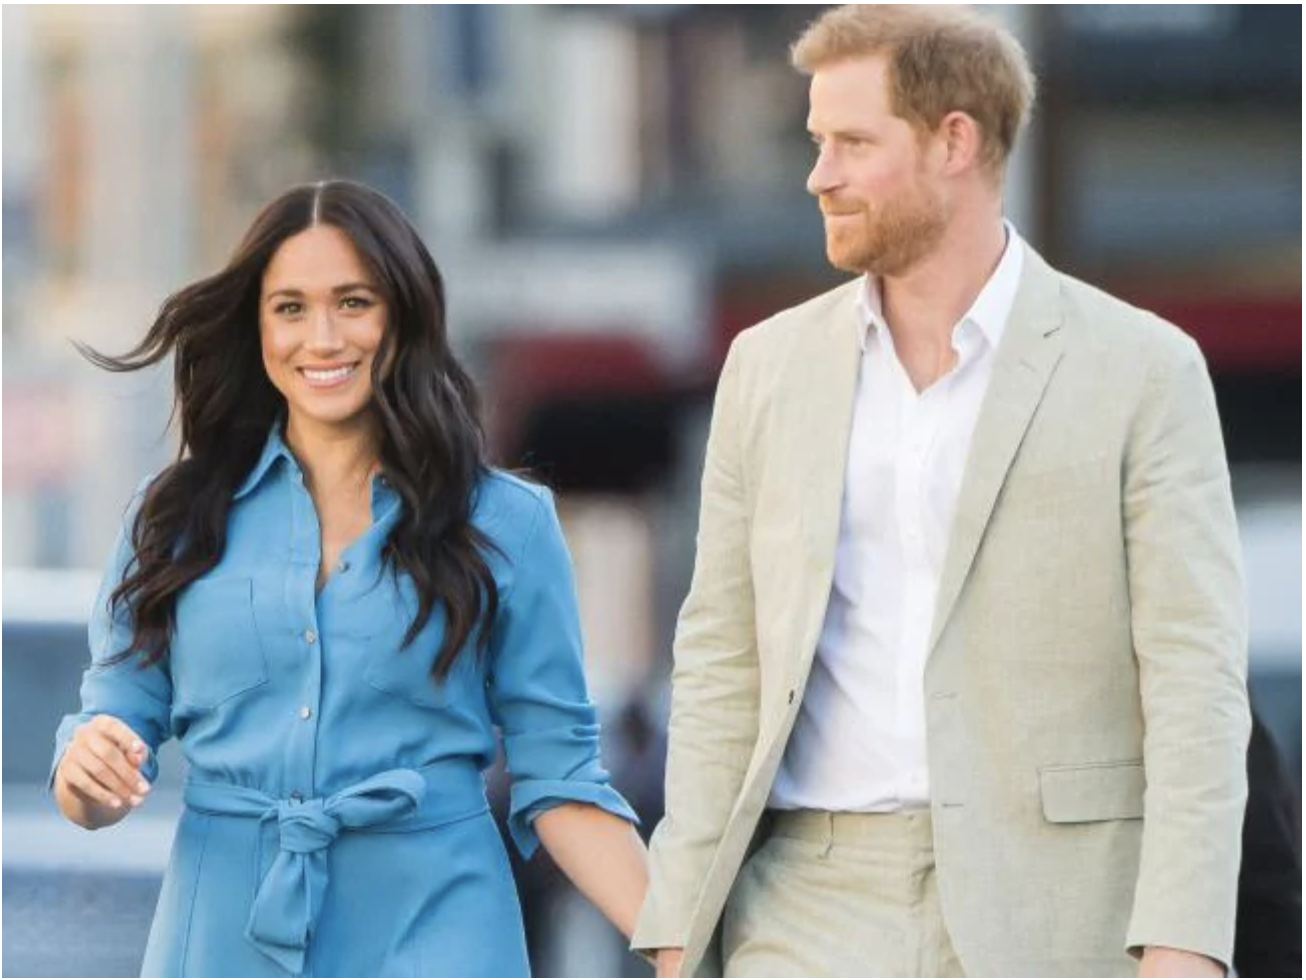  Meghan and Harry in South Africa last year during their final royal tour.Source:Supplied